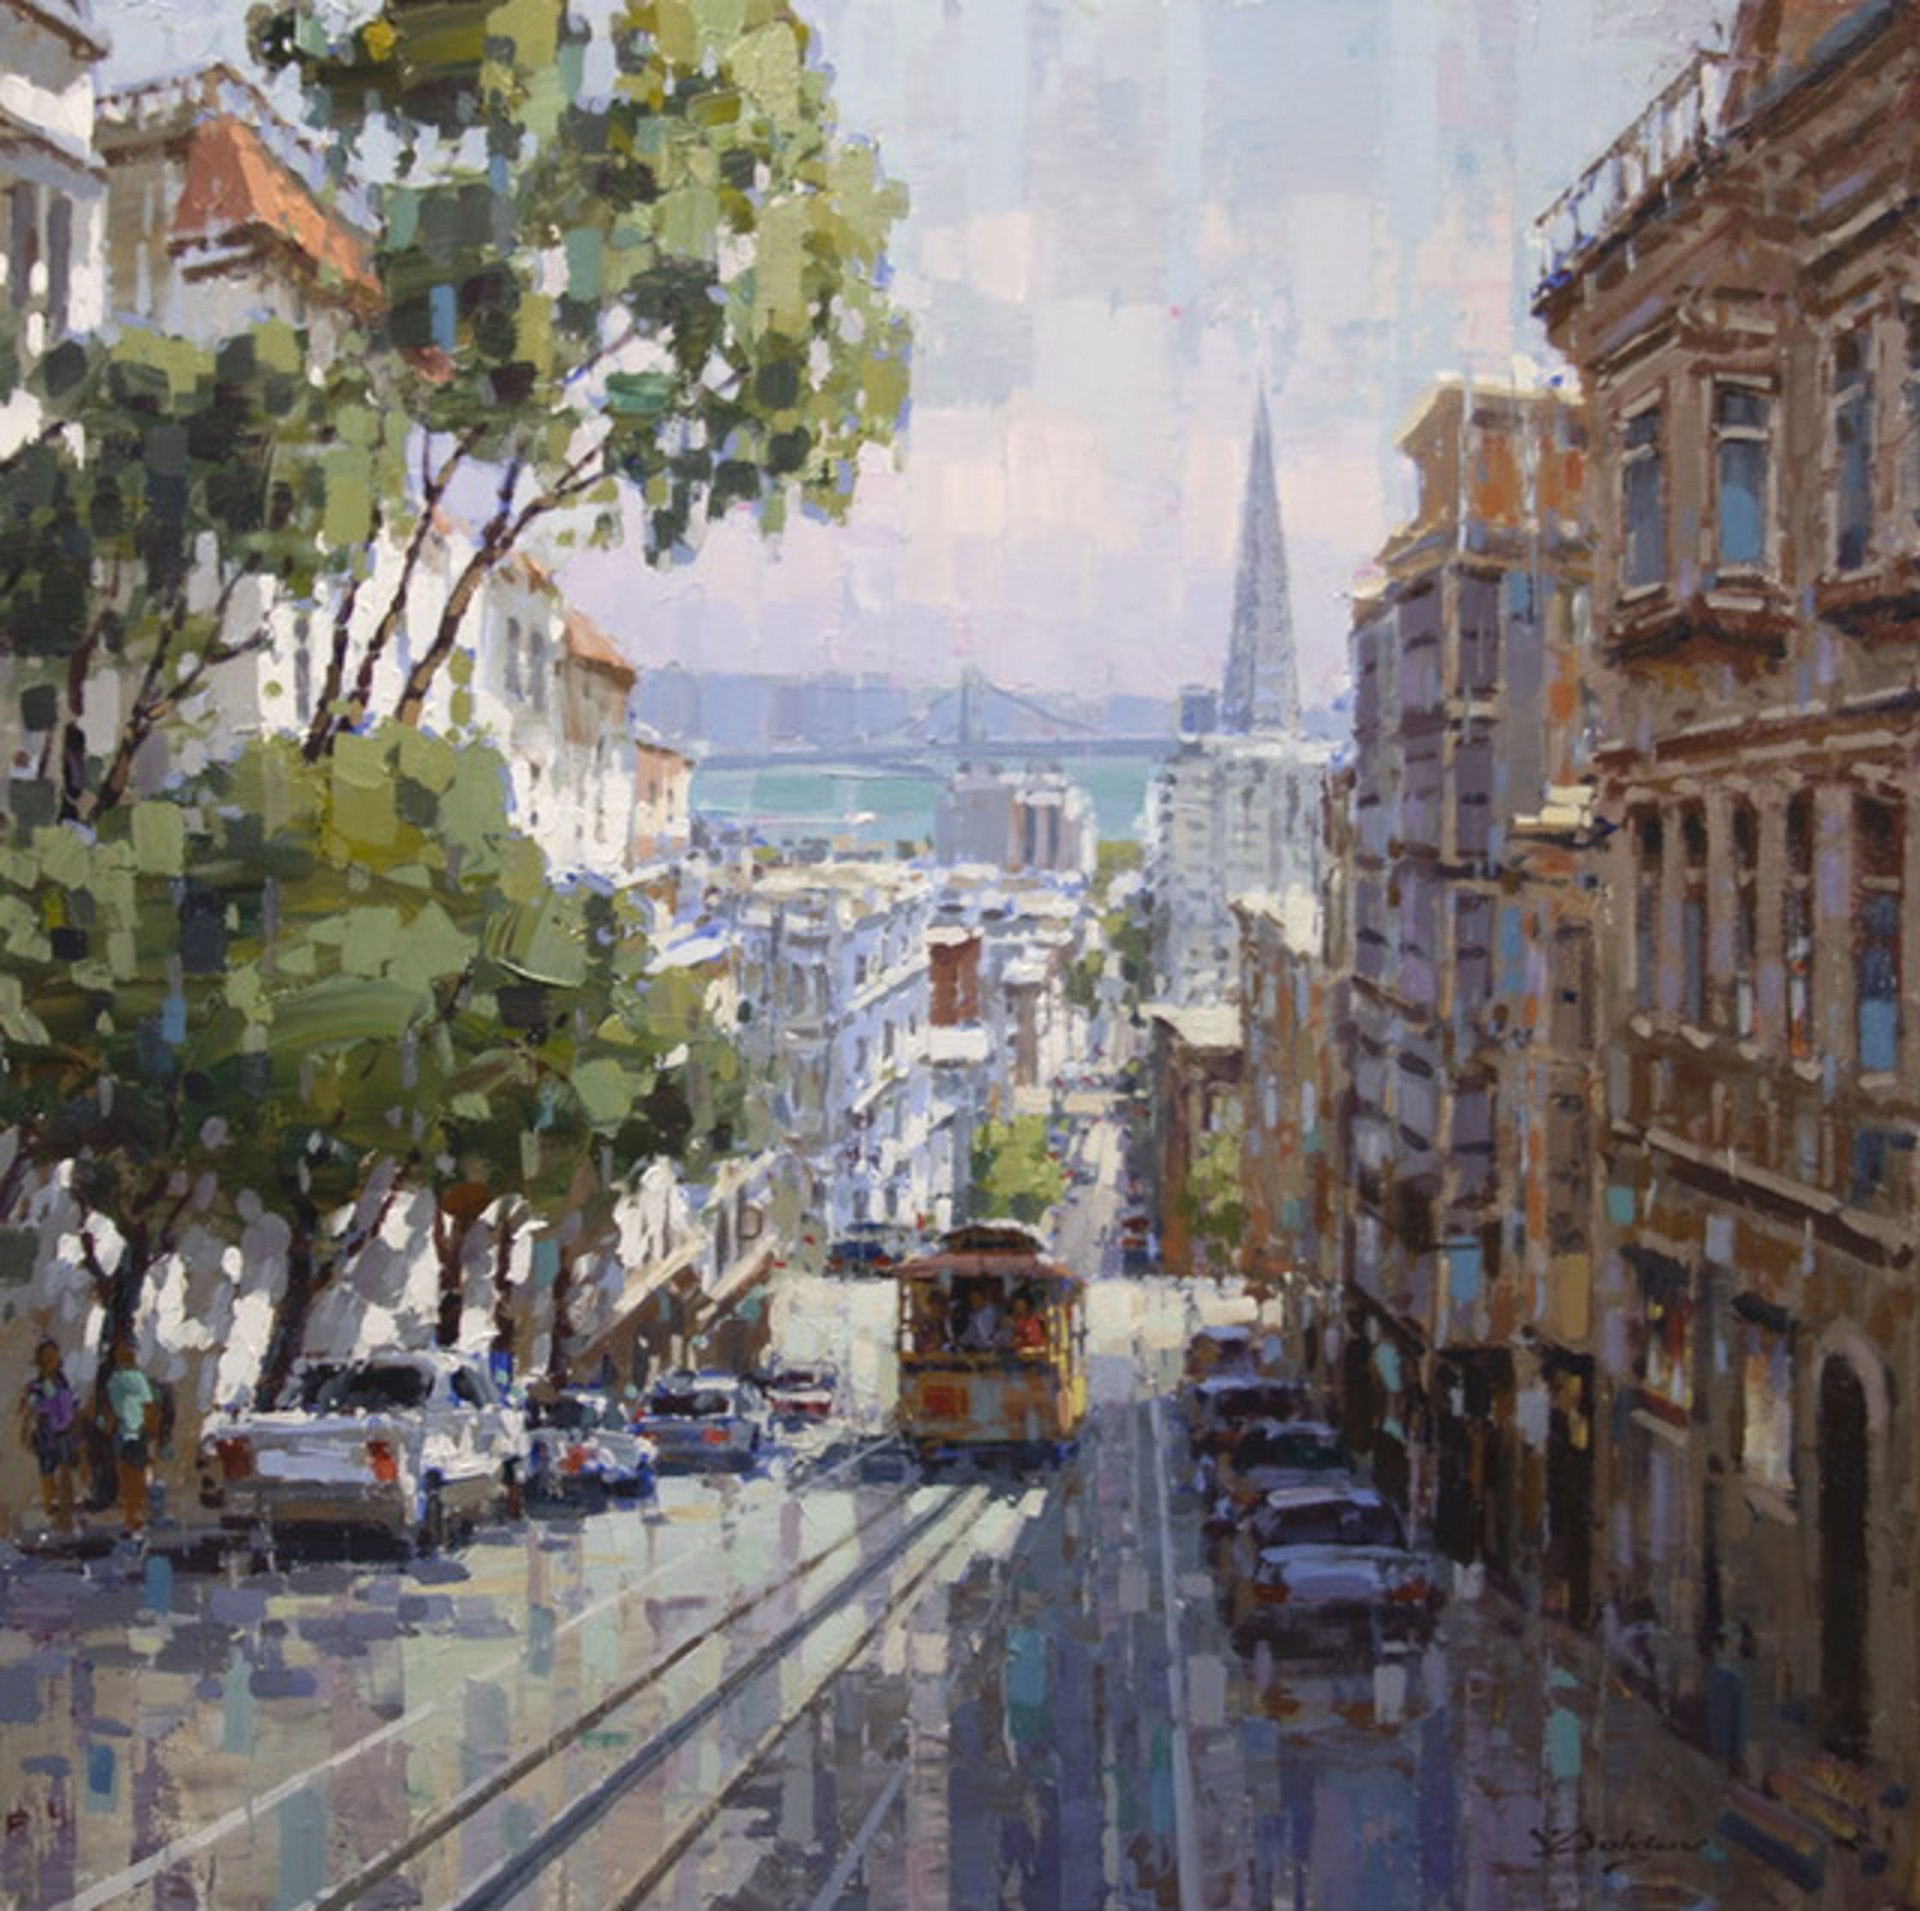 S.F. View from Nob Hill by Vadim Dolgov